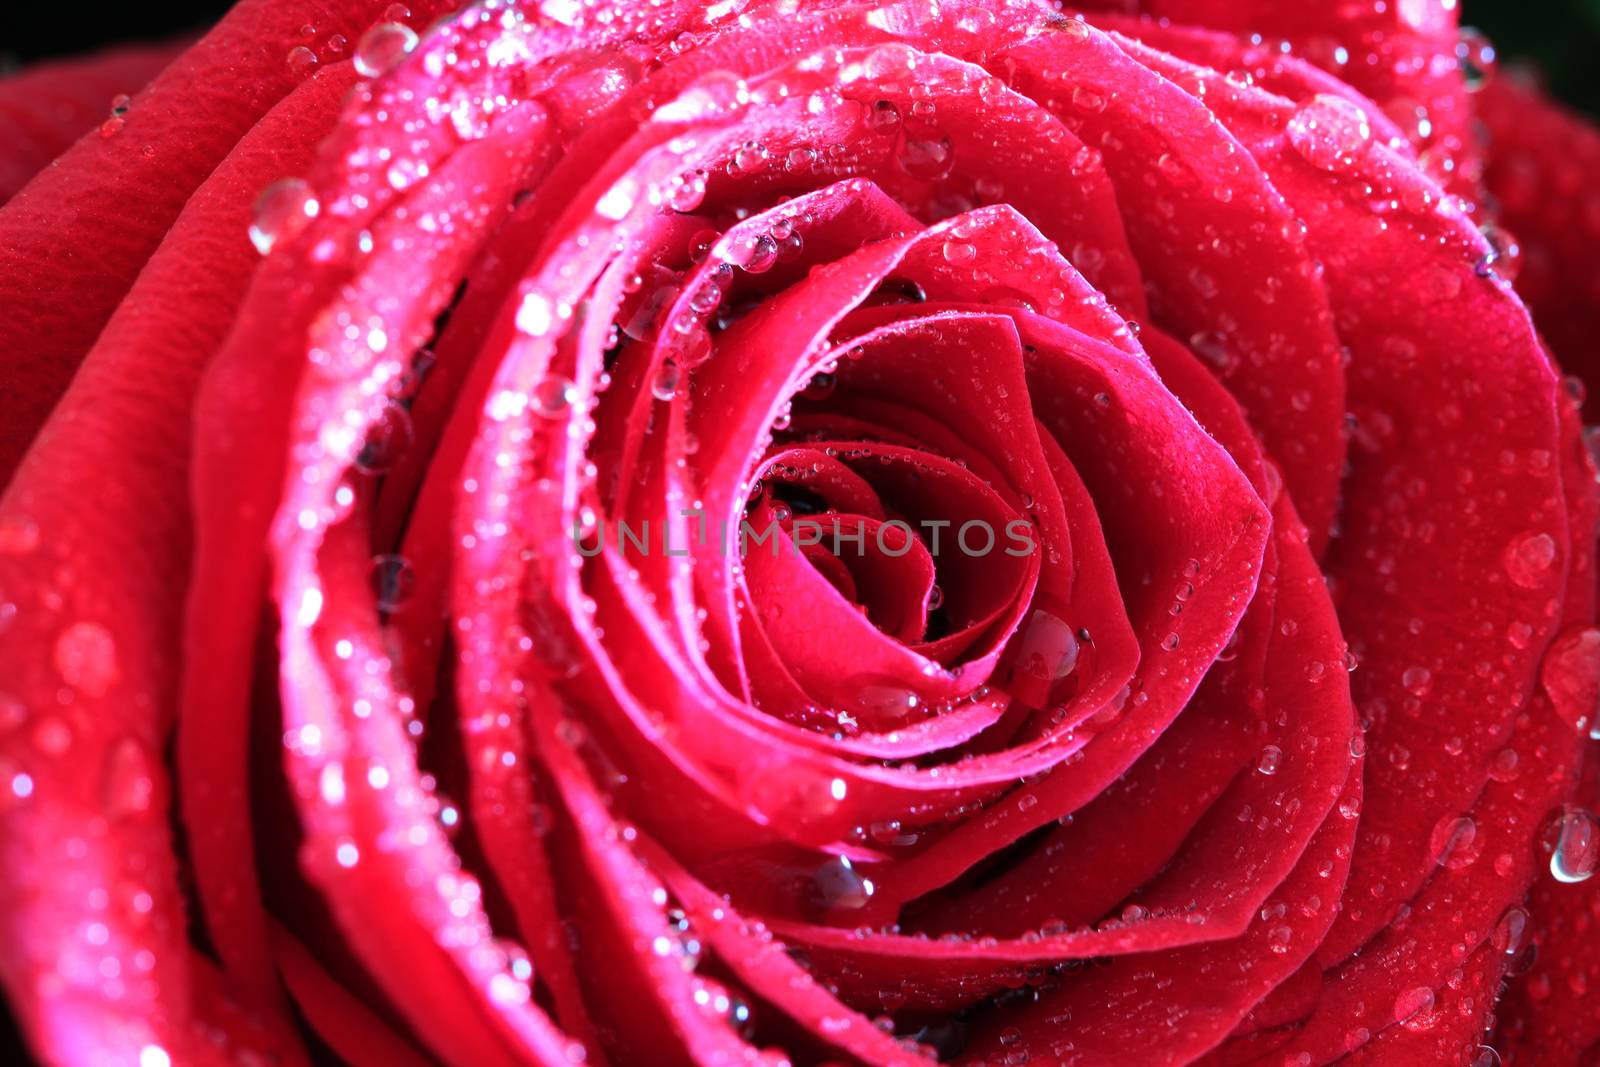 Red rose close up photo by Voinakh